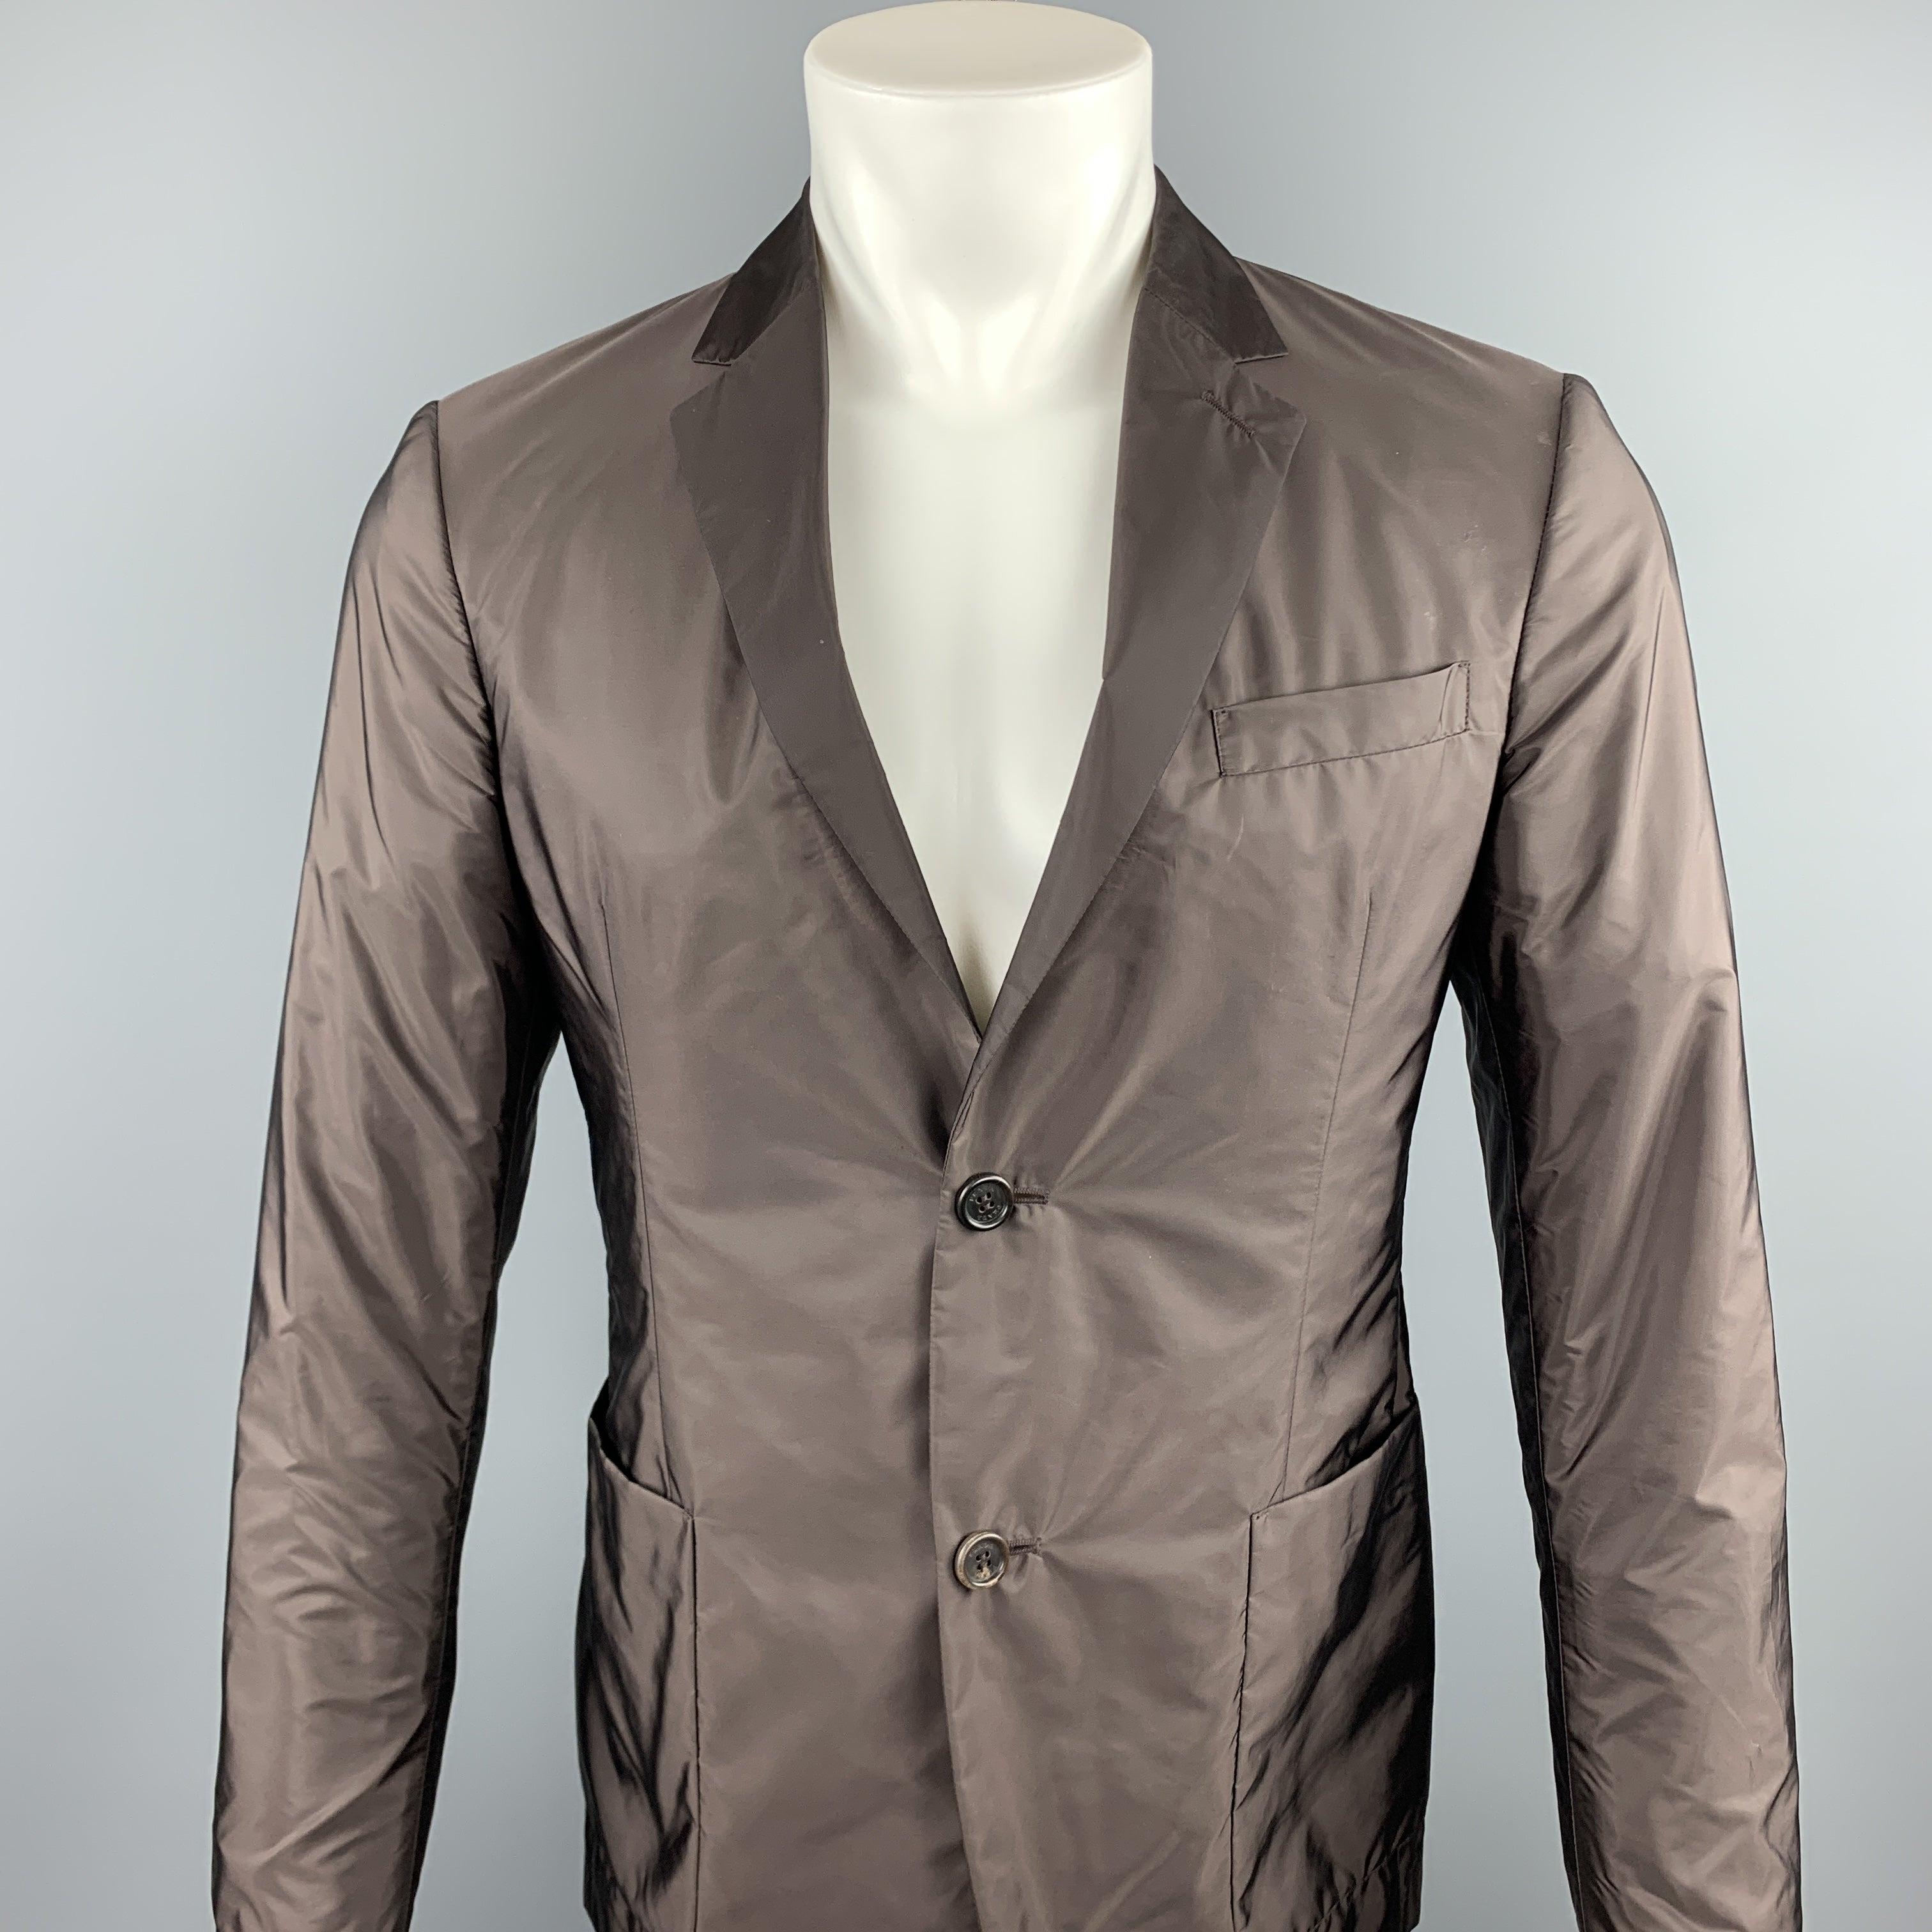 PRADA sport coat comes in a brown polyester featuring a notch lapel, patch pockets, and a two button closure.
Excellent
Pre-Owned Condition. 

Marked:   TG 48 

Measurements: 
 
Shoulder: 16.5 inches 
Chest: 38 inches 
Sleeve: 26 inches 
Length: 28